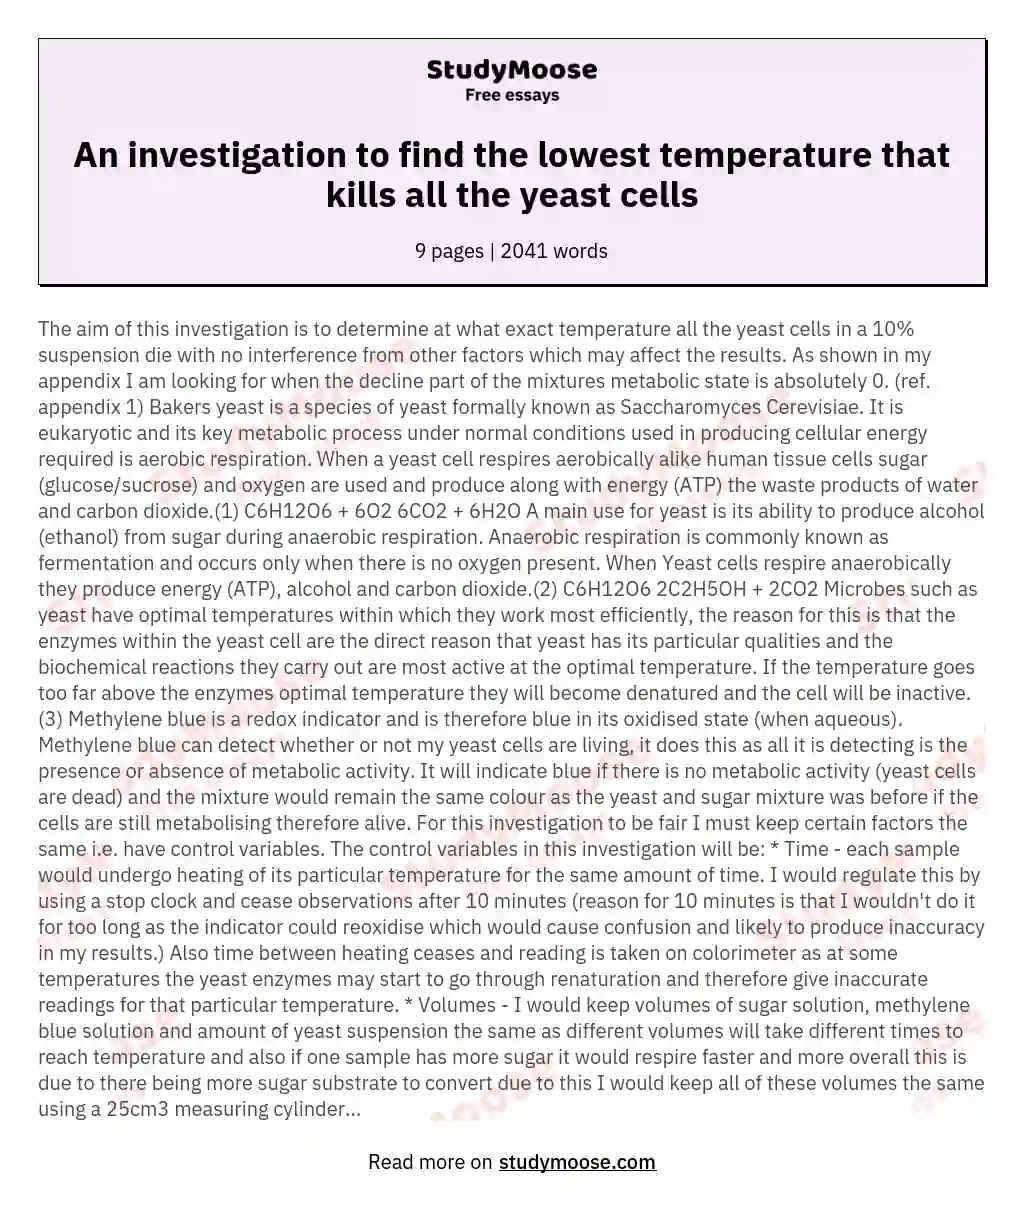 An investigation to find the lowest temperature that kills all the yeast cells essay